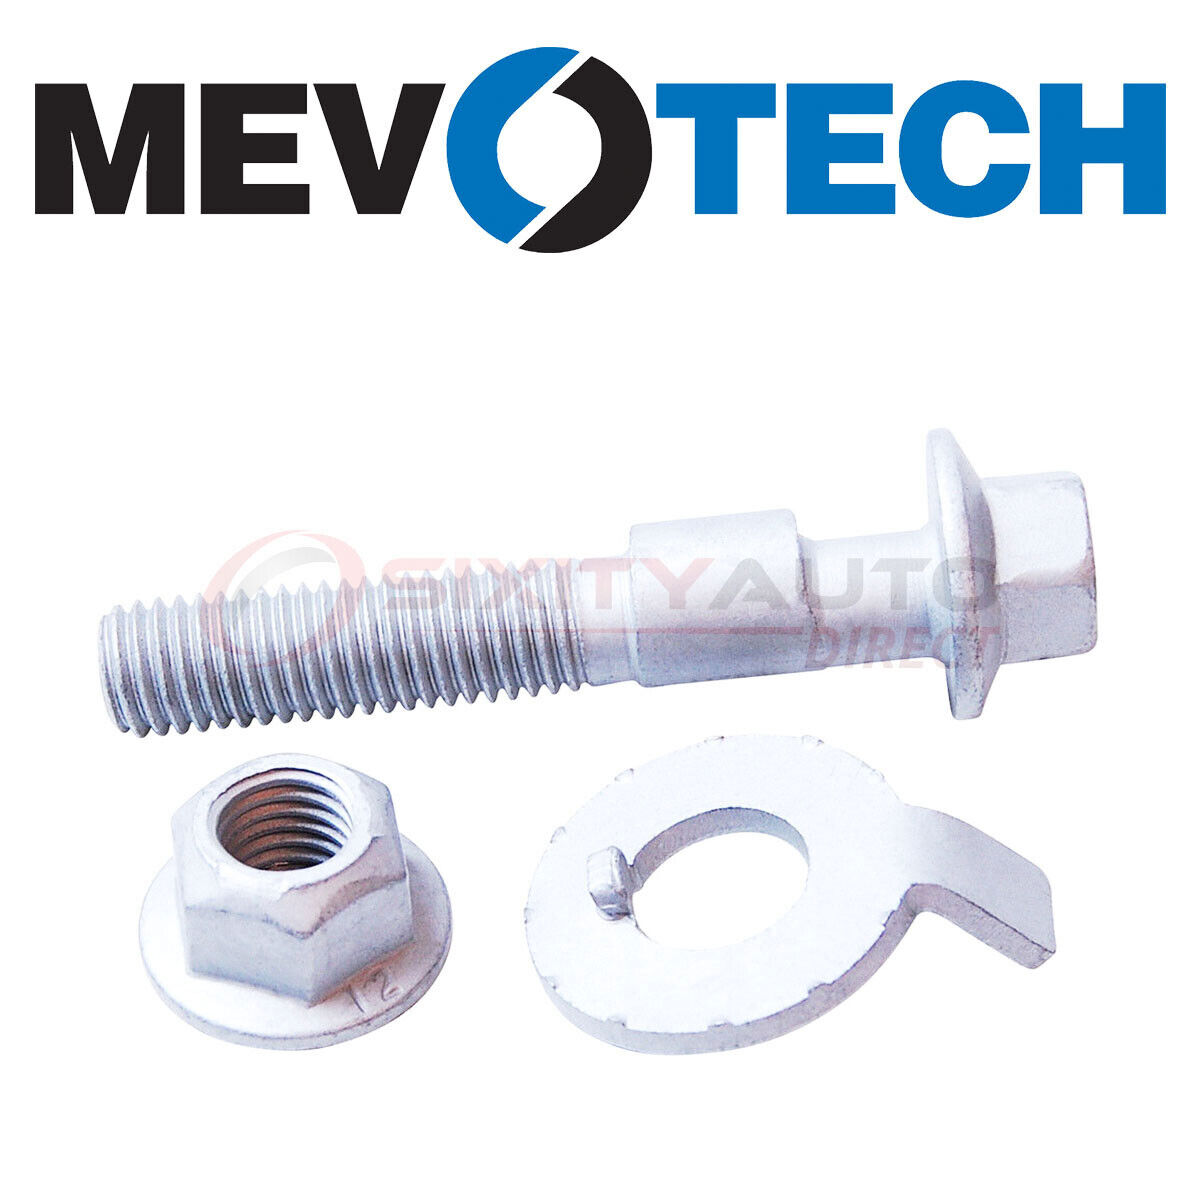 Mevotech Alignment Camber Kit for 1994 Saturn SC1 1.9L L4 - Wheels Tires qf